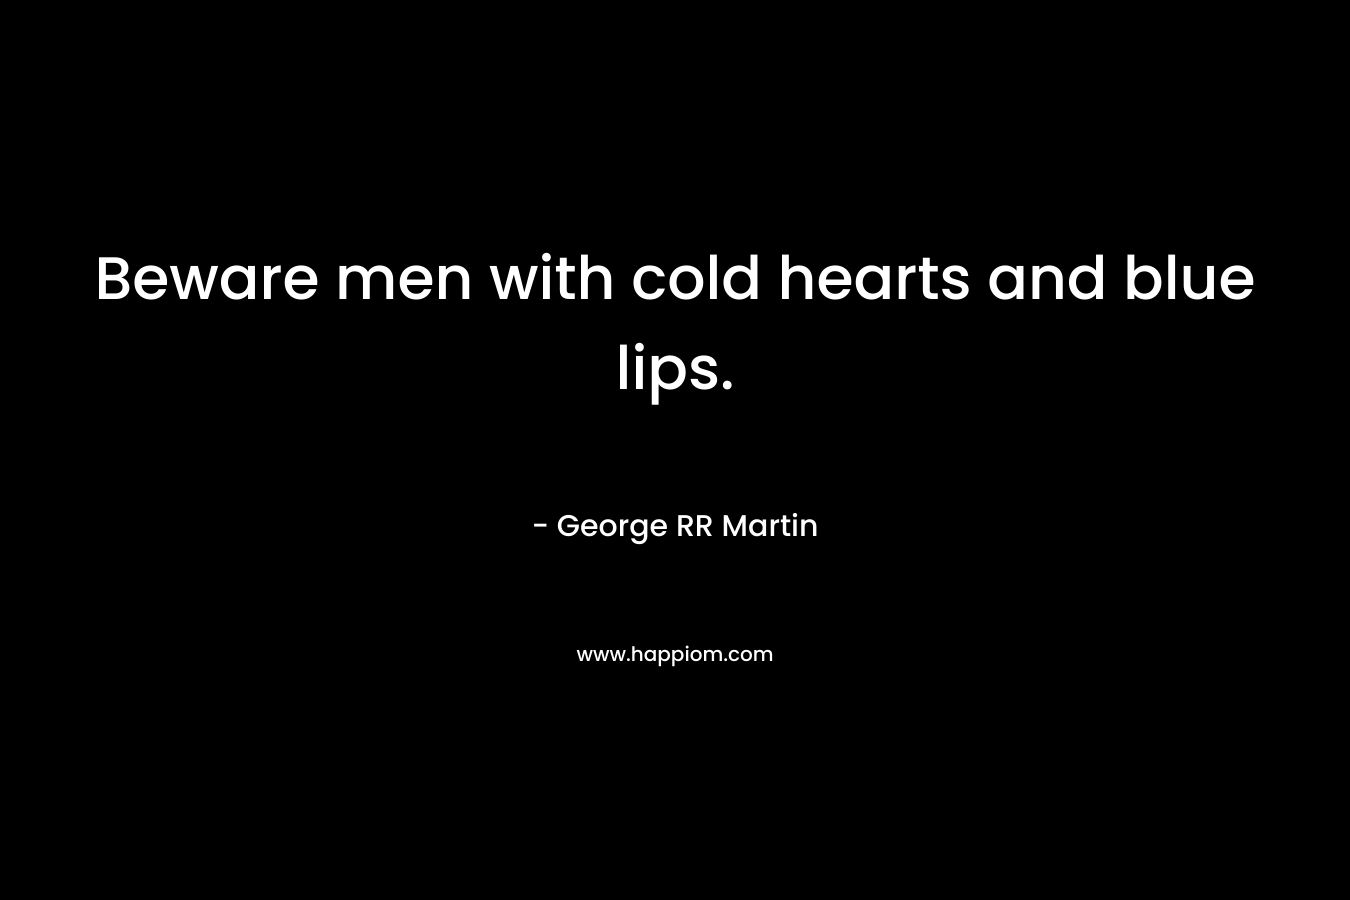 Beware men with cold hearts and blue lips.